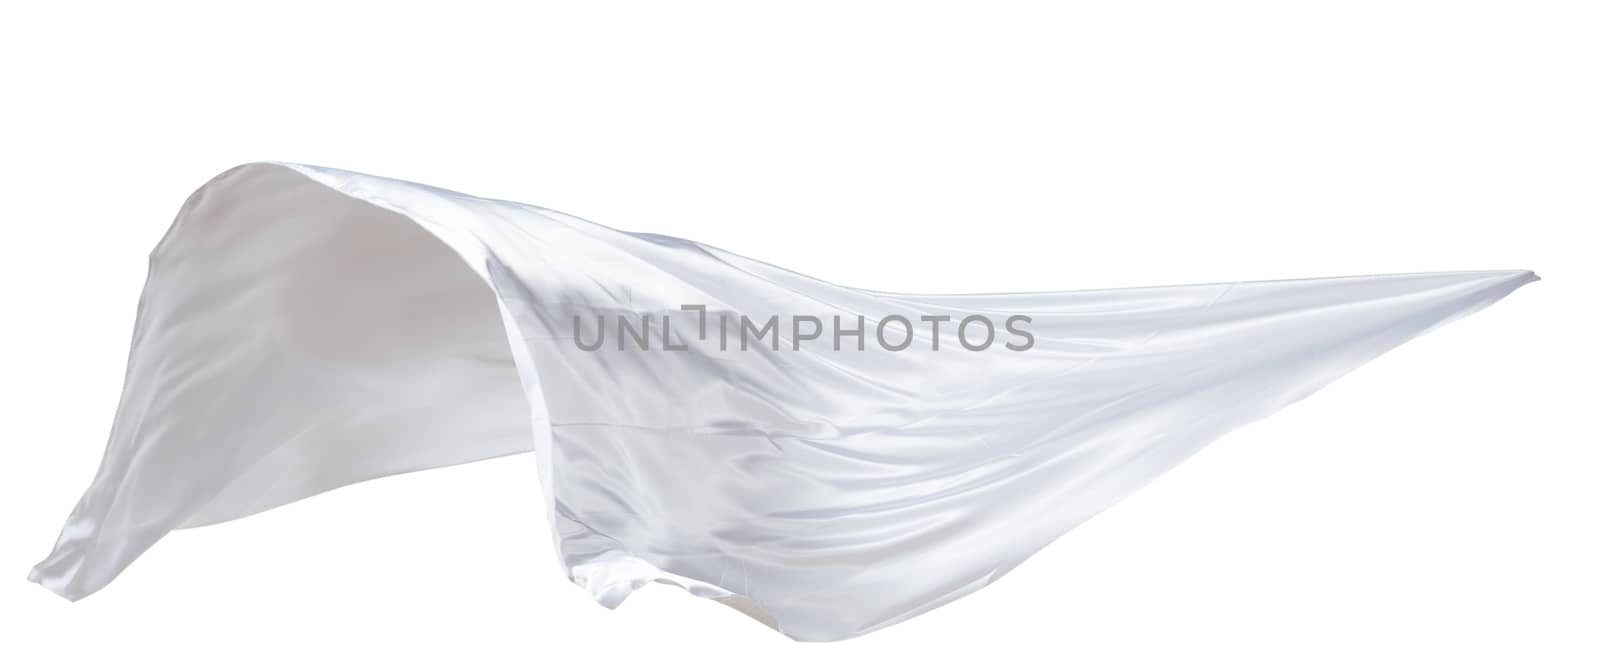 fabric weaves the wind, isolated on white background